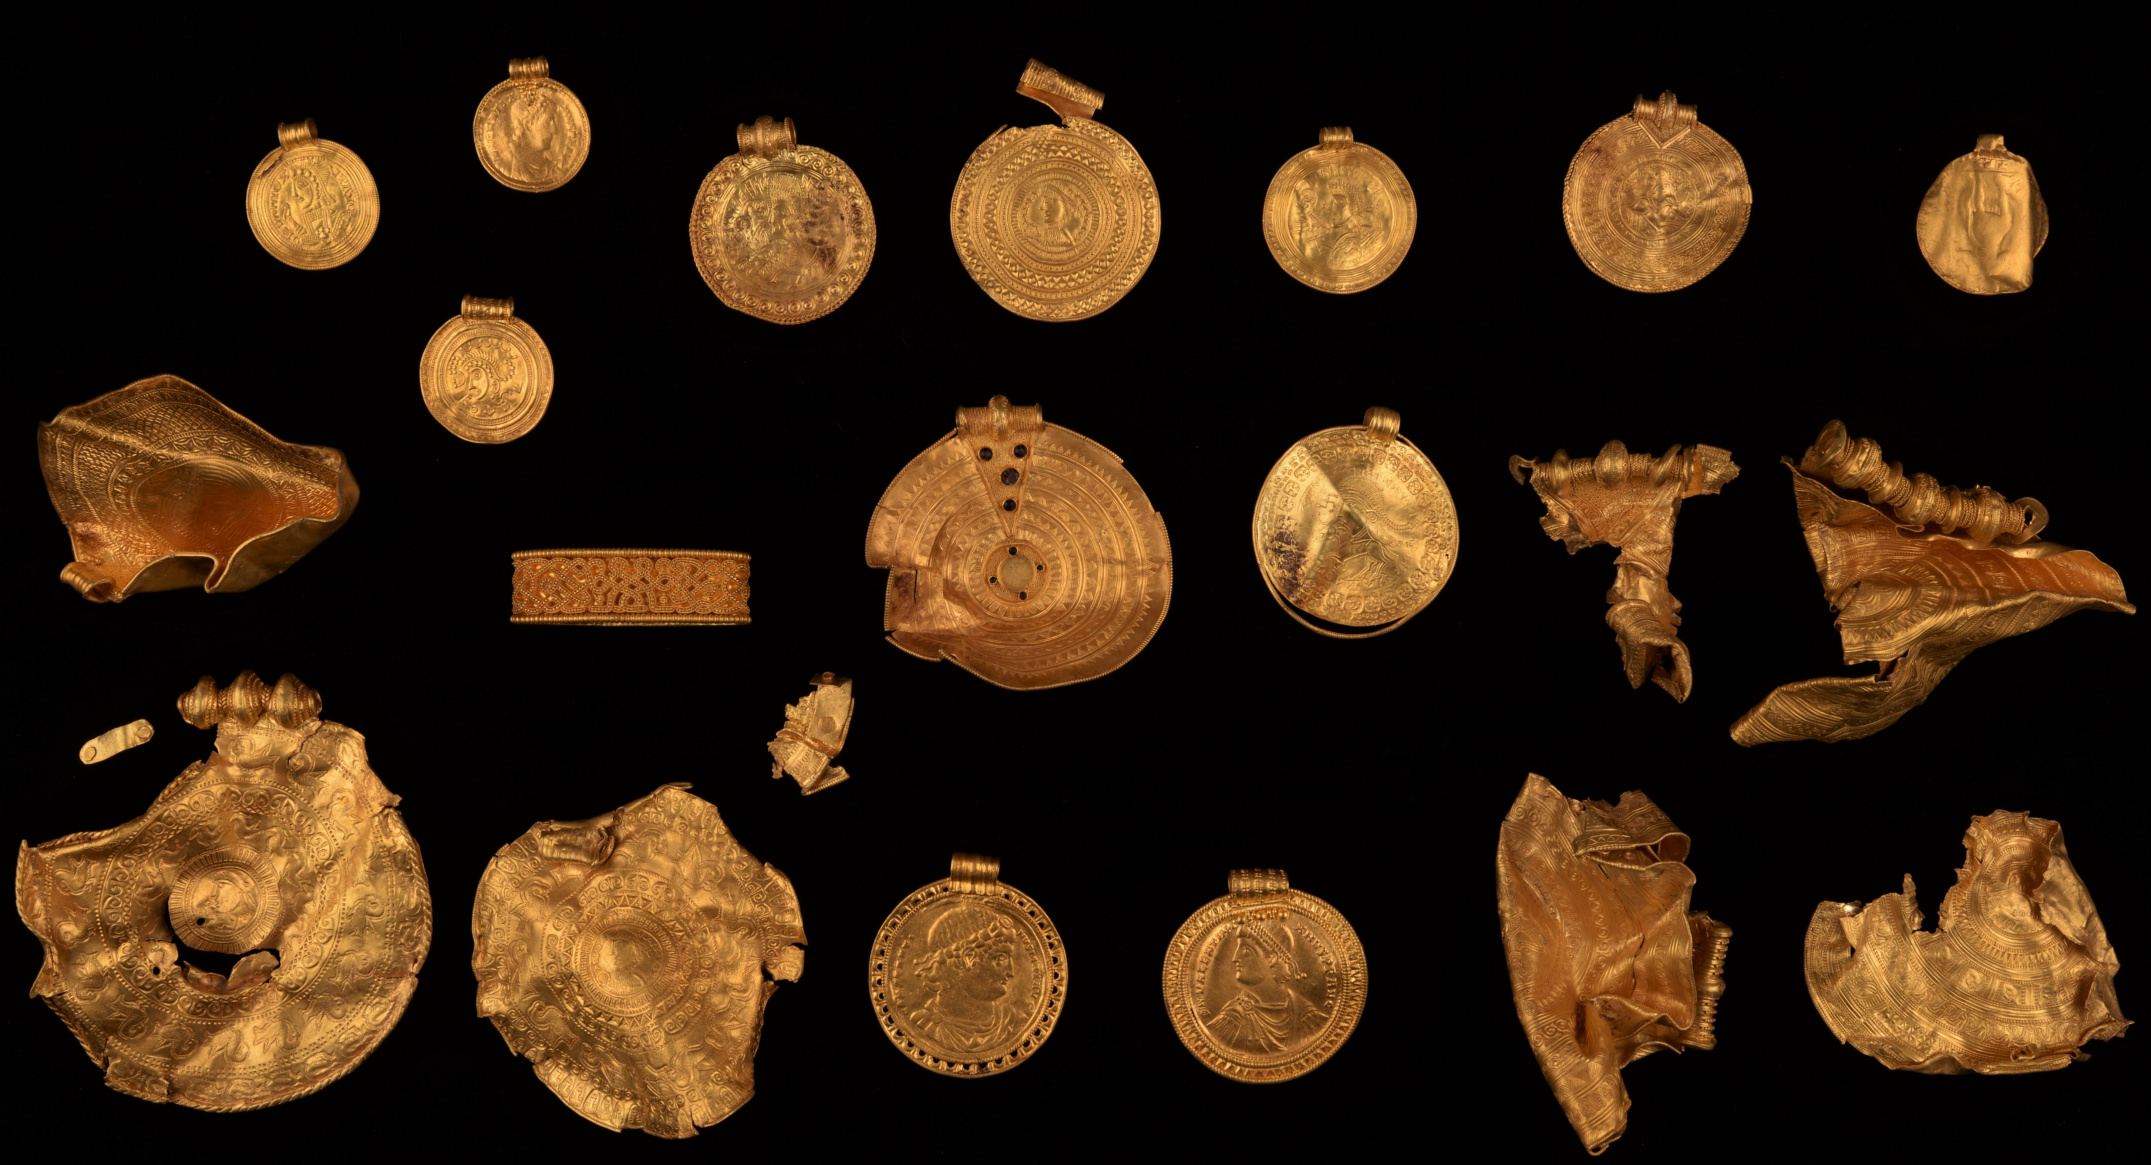 The bracteate was part of a buried Vindelev hoard of gold objects, some of them dating to the fifth century A.D., that was unearthed in the east of Denmark's Jutland region in 2021.